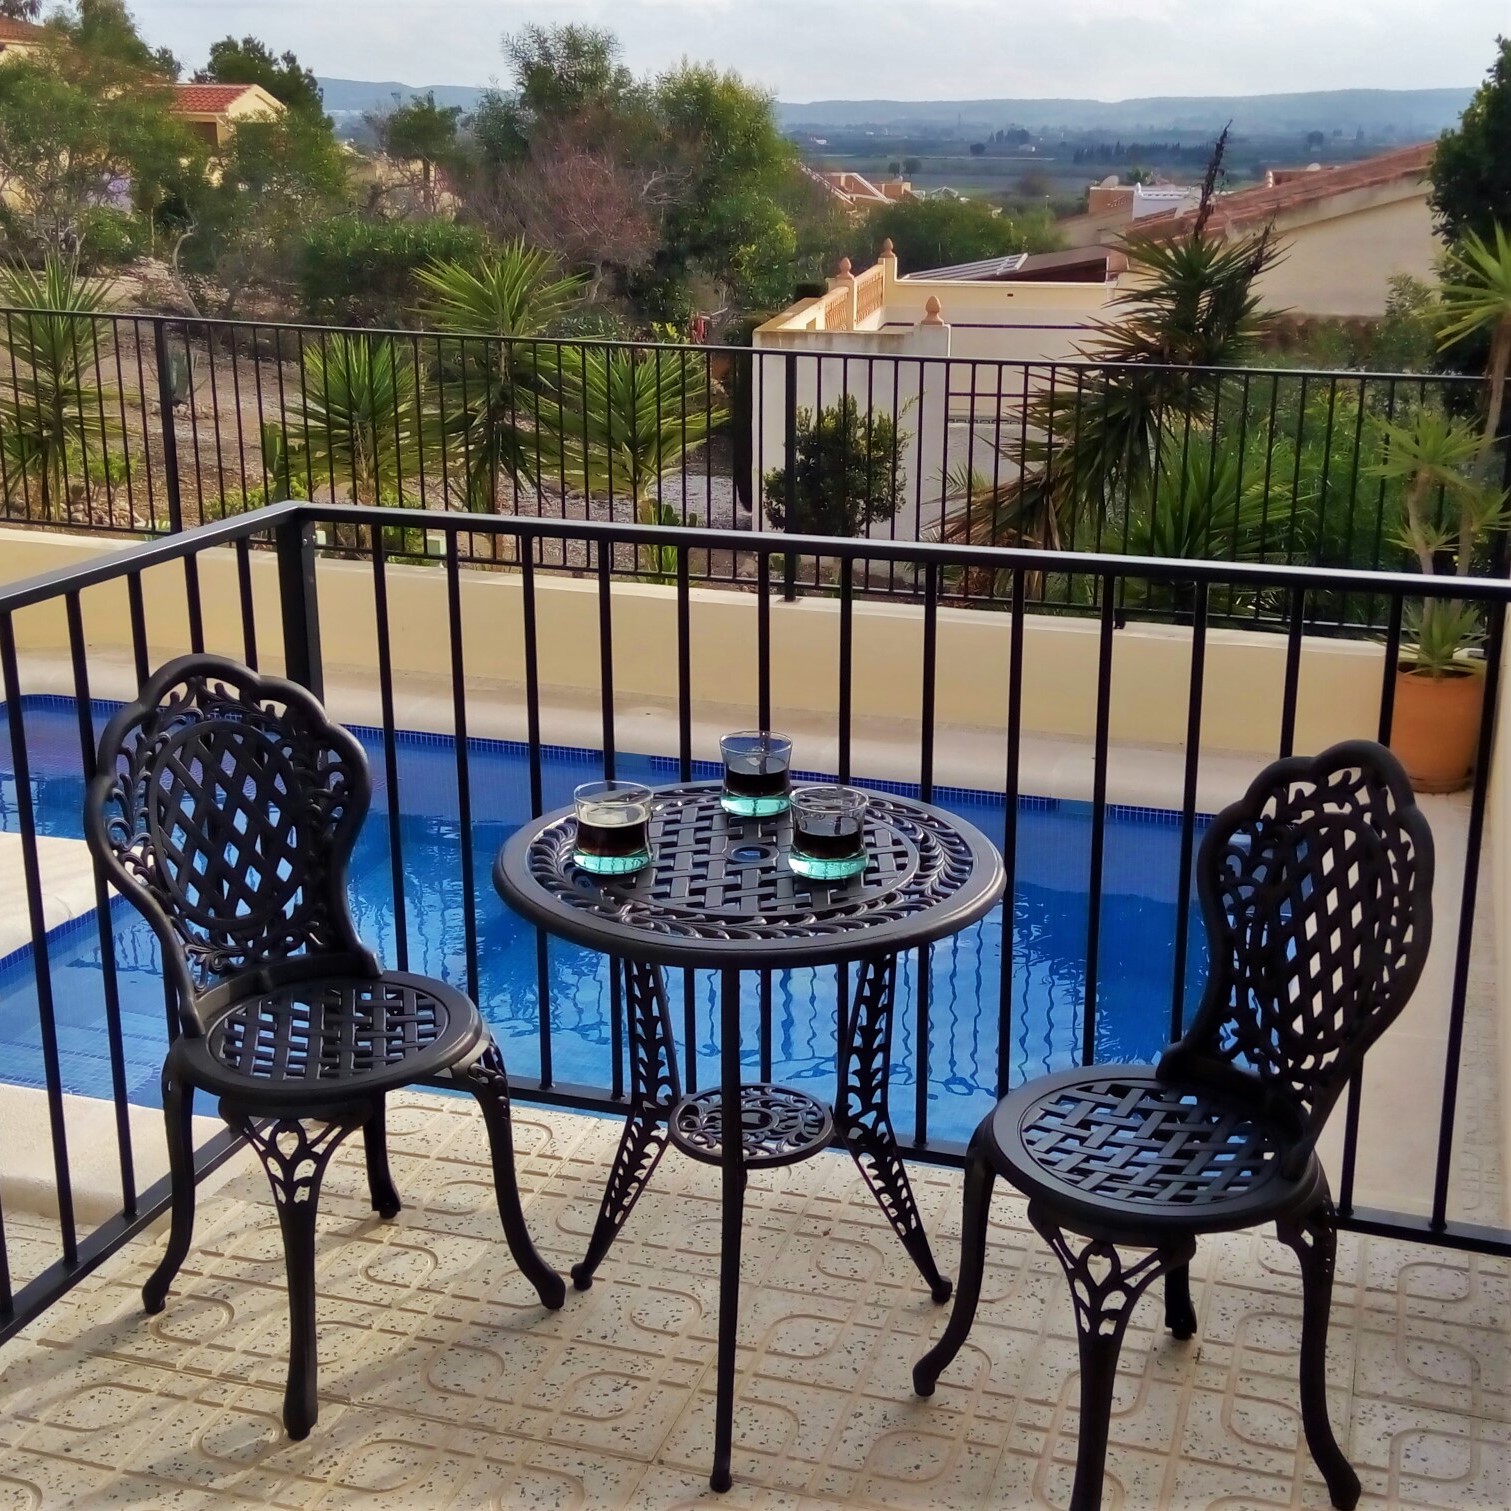 What should you look for when shopping for balcony furniture?